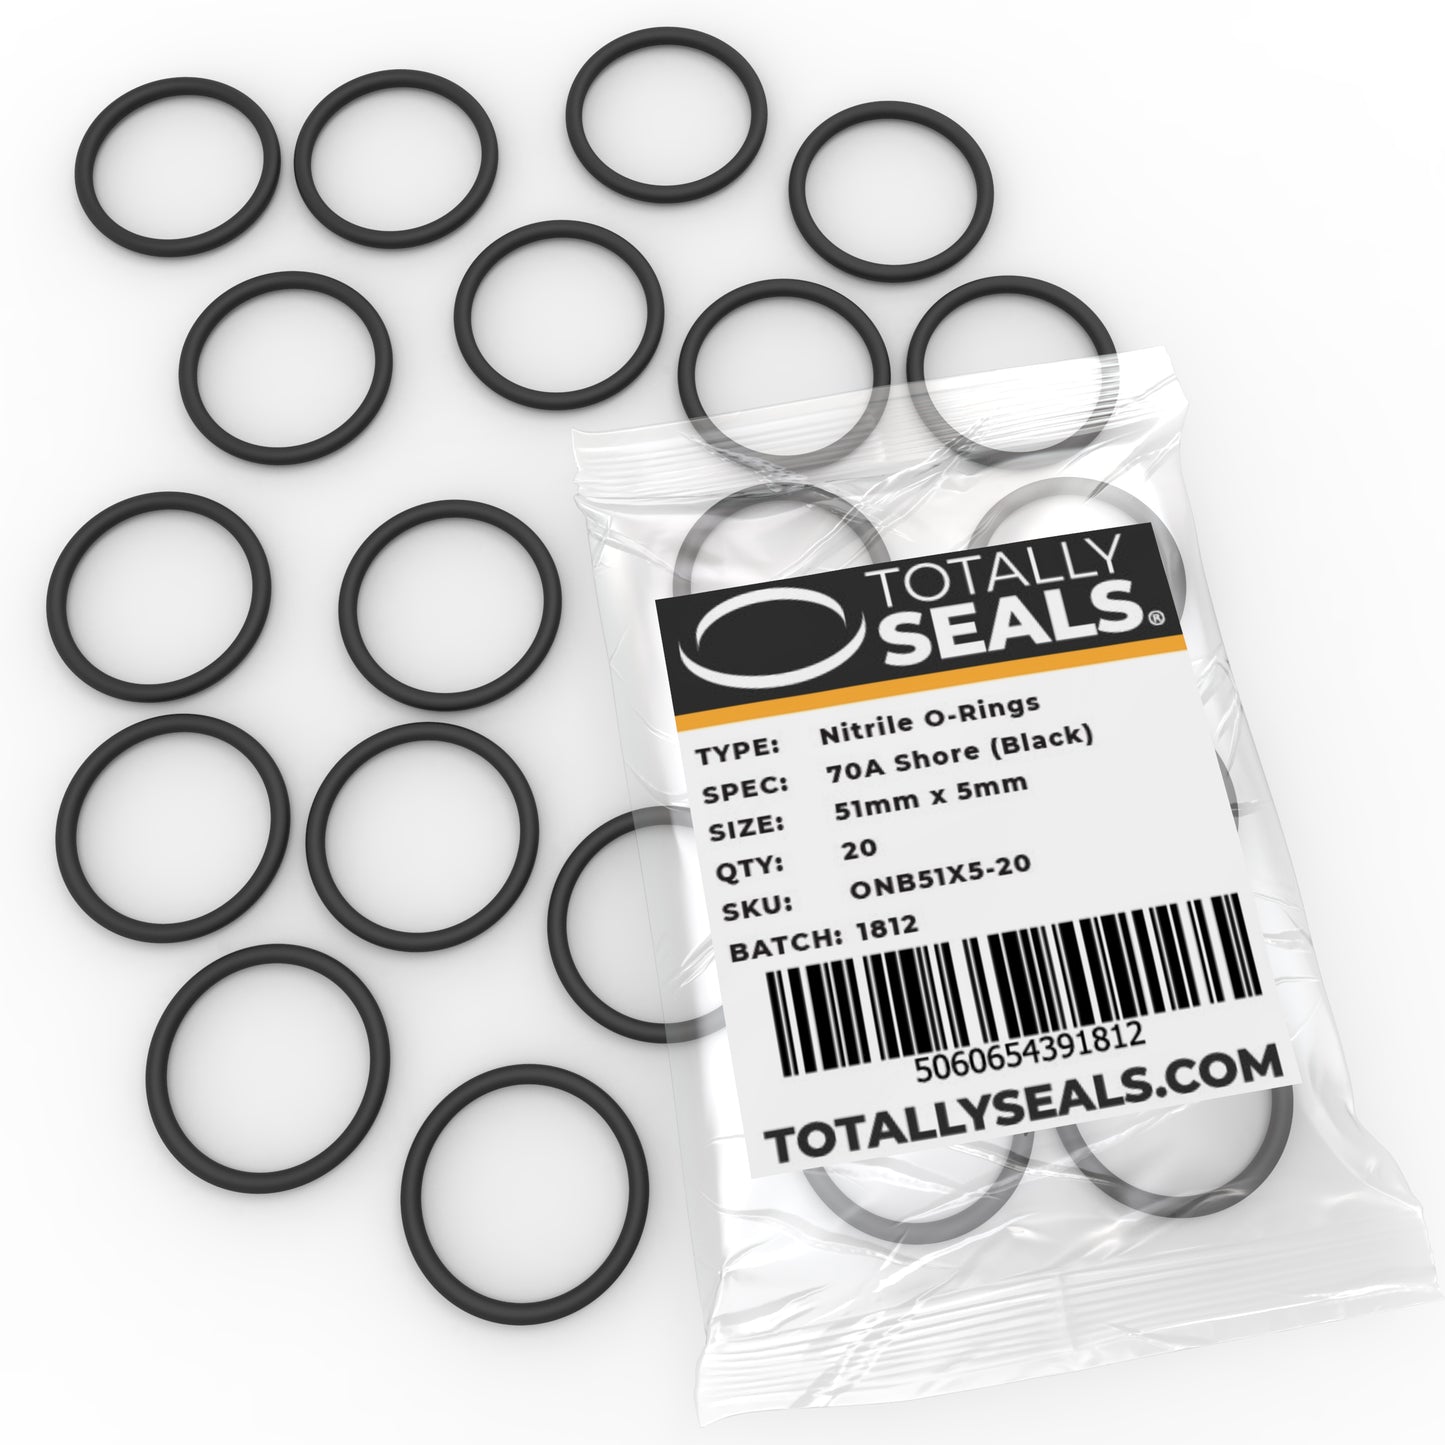 51mm x 5mm (61mm OD) Nitrile O-Rings - Totally Seals®